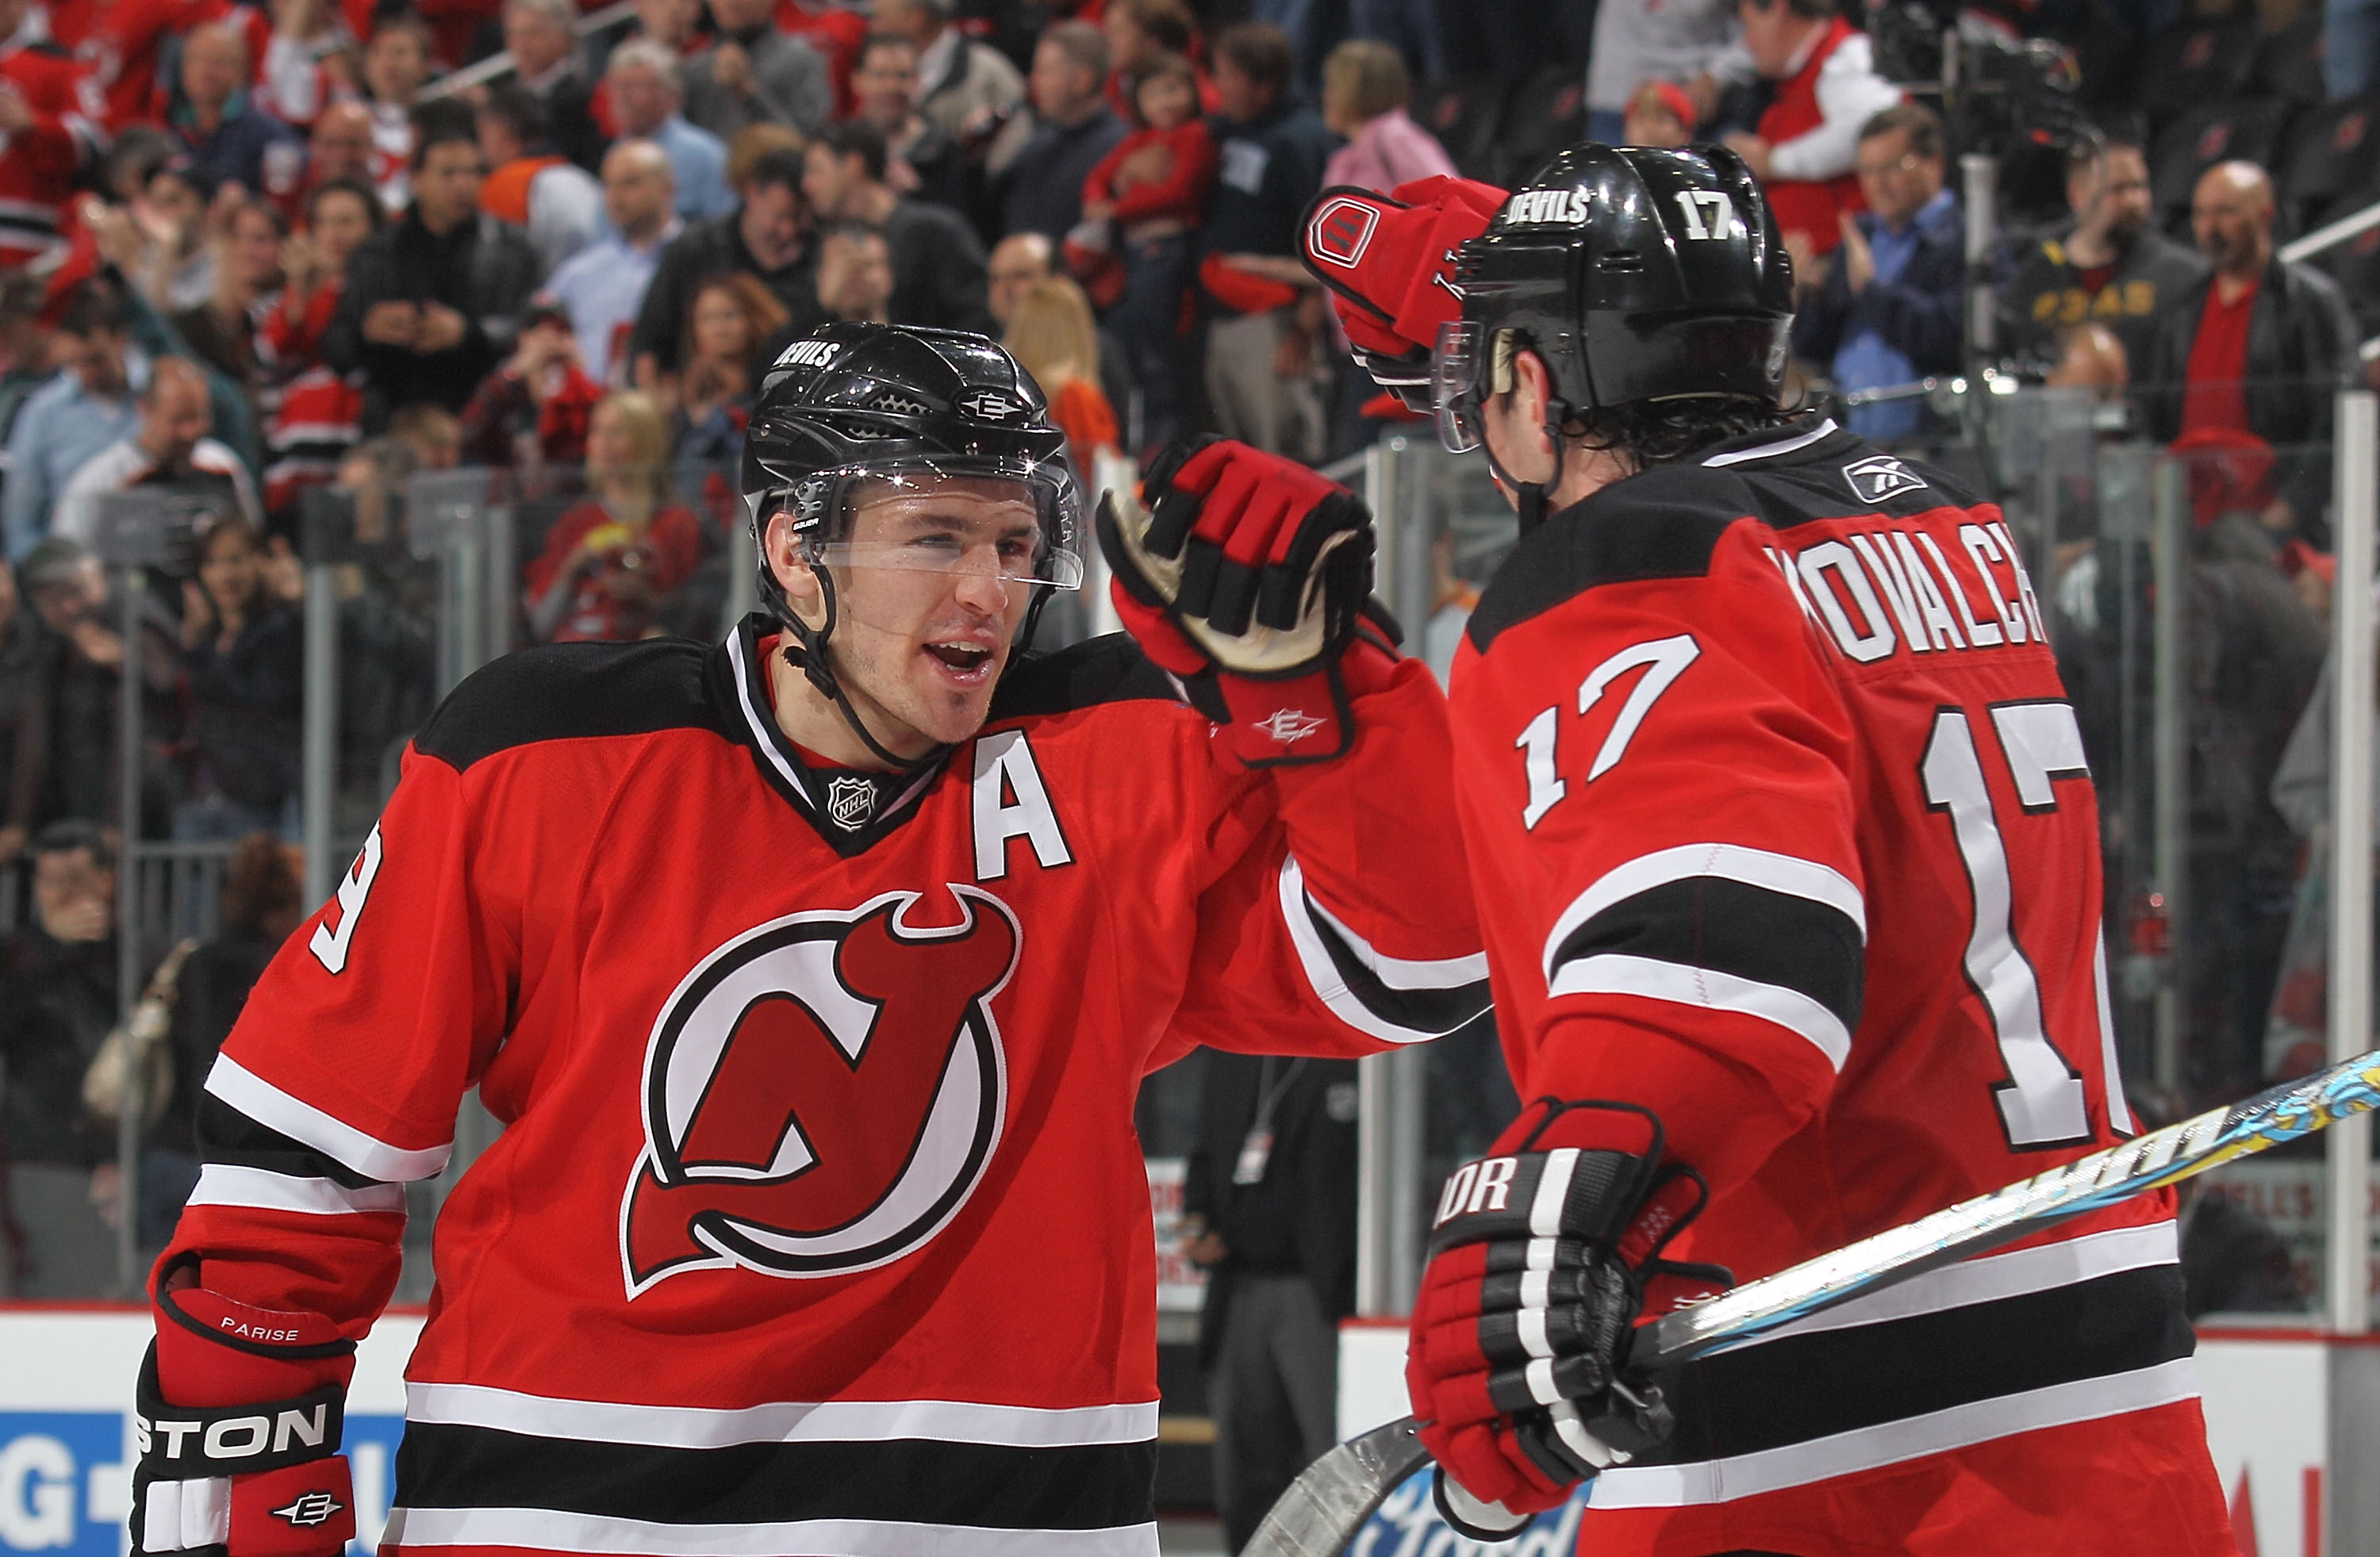 NEWARK, NJ - APRIL 16: Zach Parise #9 and Ilya Kovachuk #17 of the New Jersey Devils celebrate their 5-3 victory over the Philadelphia Flyers in Game Two of the Eastern Conference Quarterfinals during the 2010 NHL Stanley Cup Playoffs at the Prudential Ce